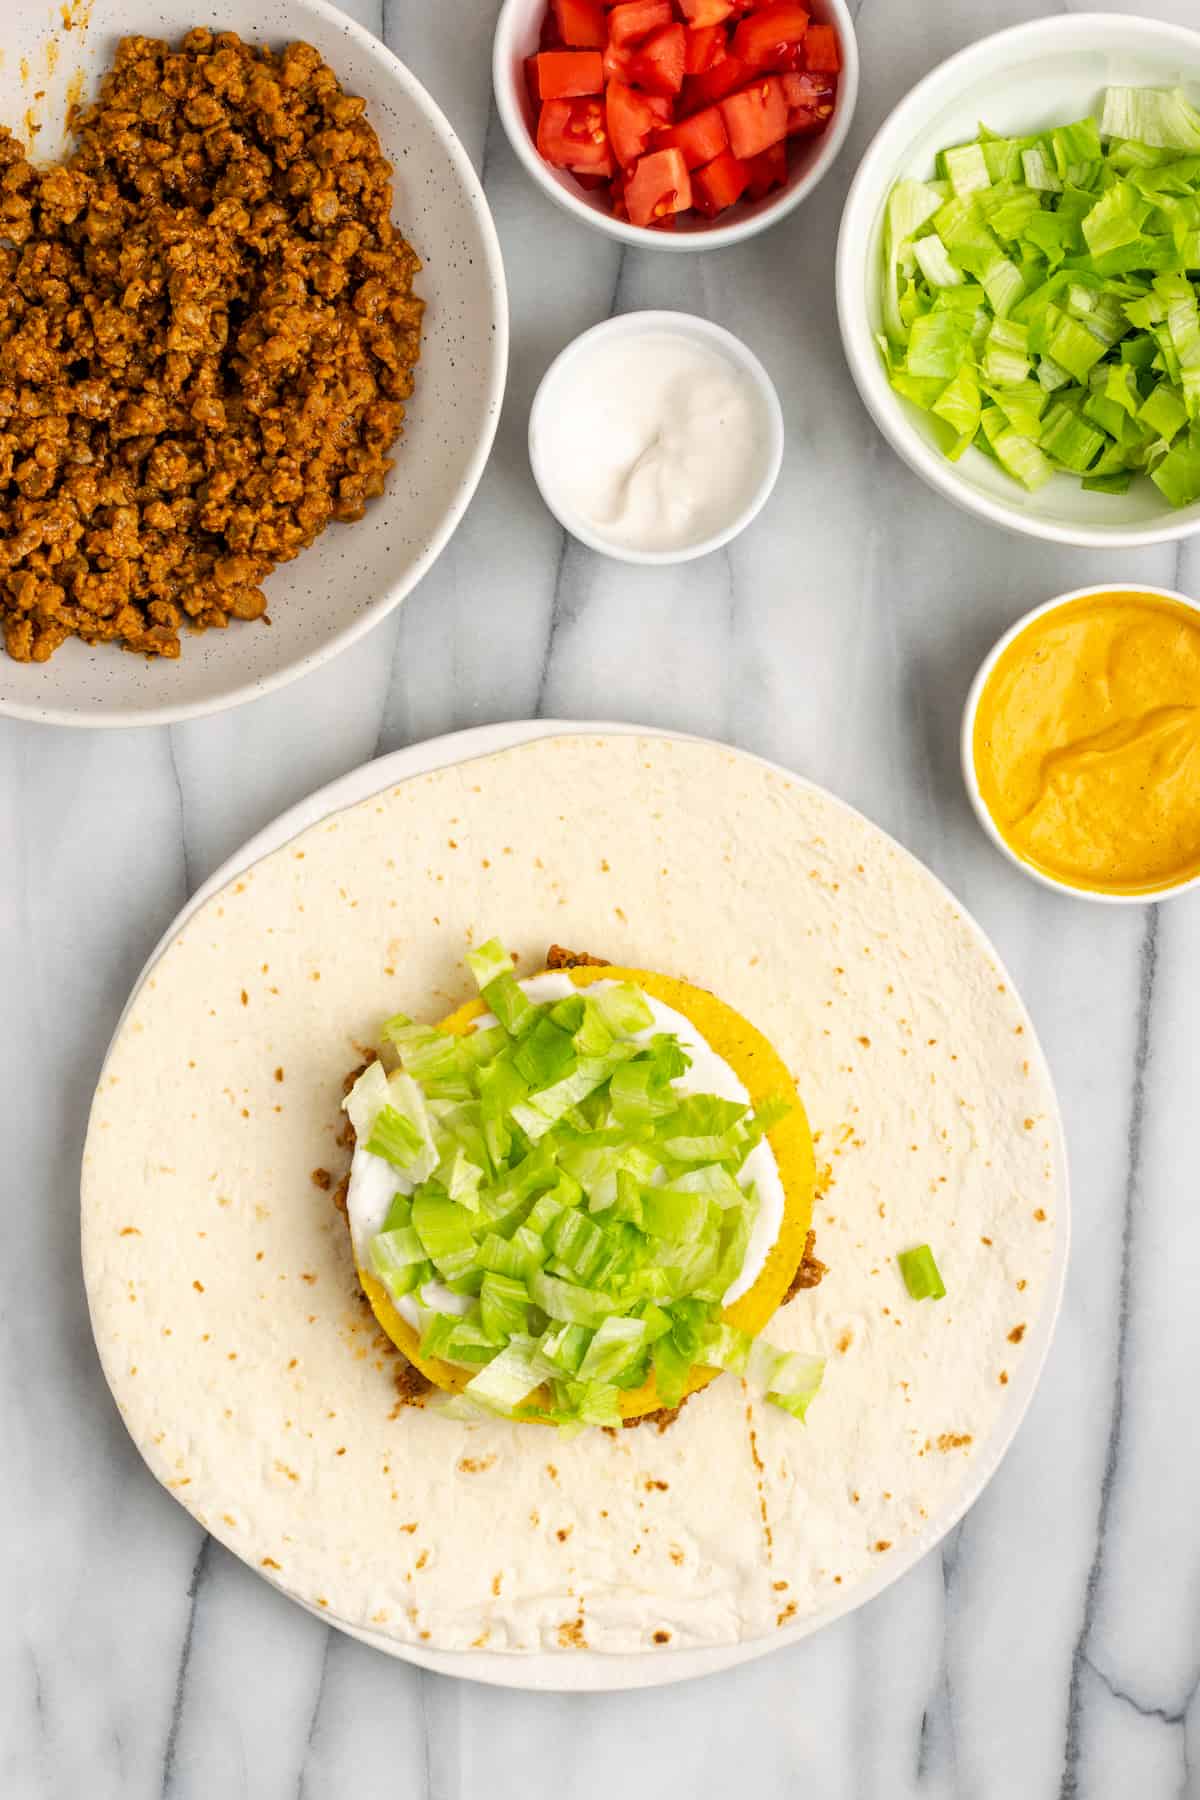 A flour tortilla topped with vegan meat crumbles, vegan cheese sauce, a tostada, vegan sour cream, and lettuce, next to bowls of meat crumbles, sour cream, cheese sauce, lettuce, and tomatoes